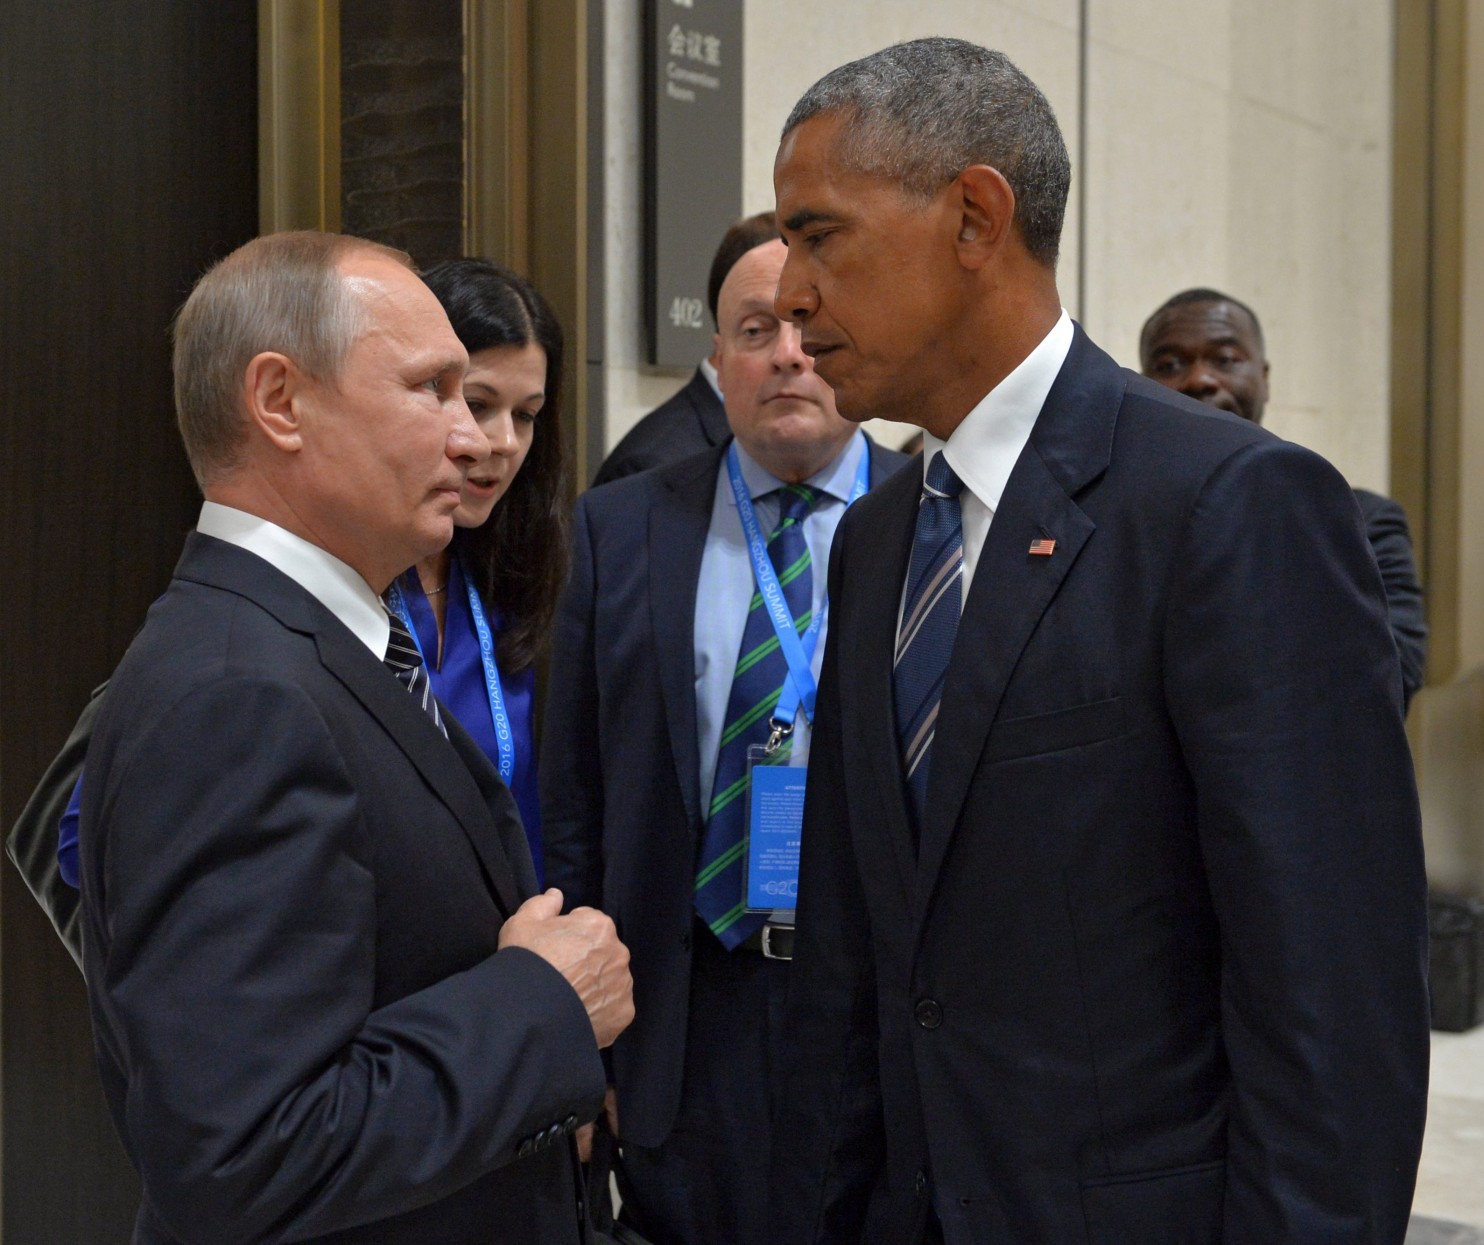 U.S., Russia in ‘Tough’ Negotiations Over Syria Cease-Fire, Obama Says